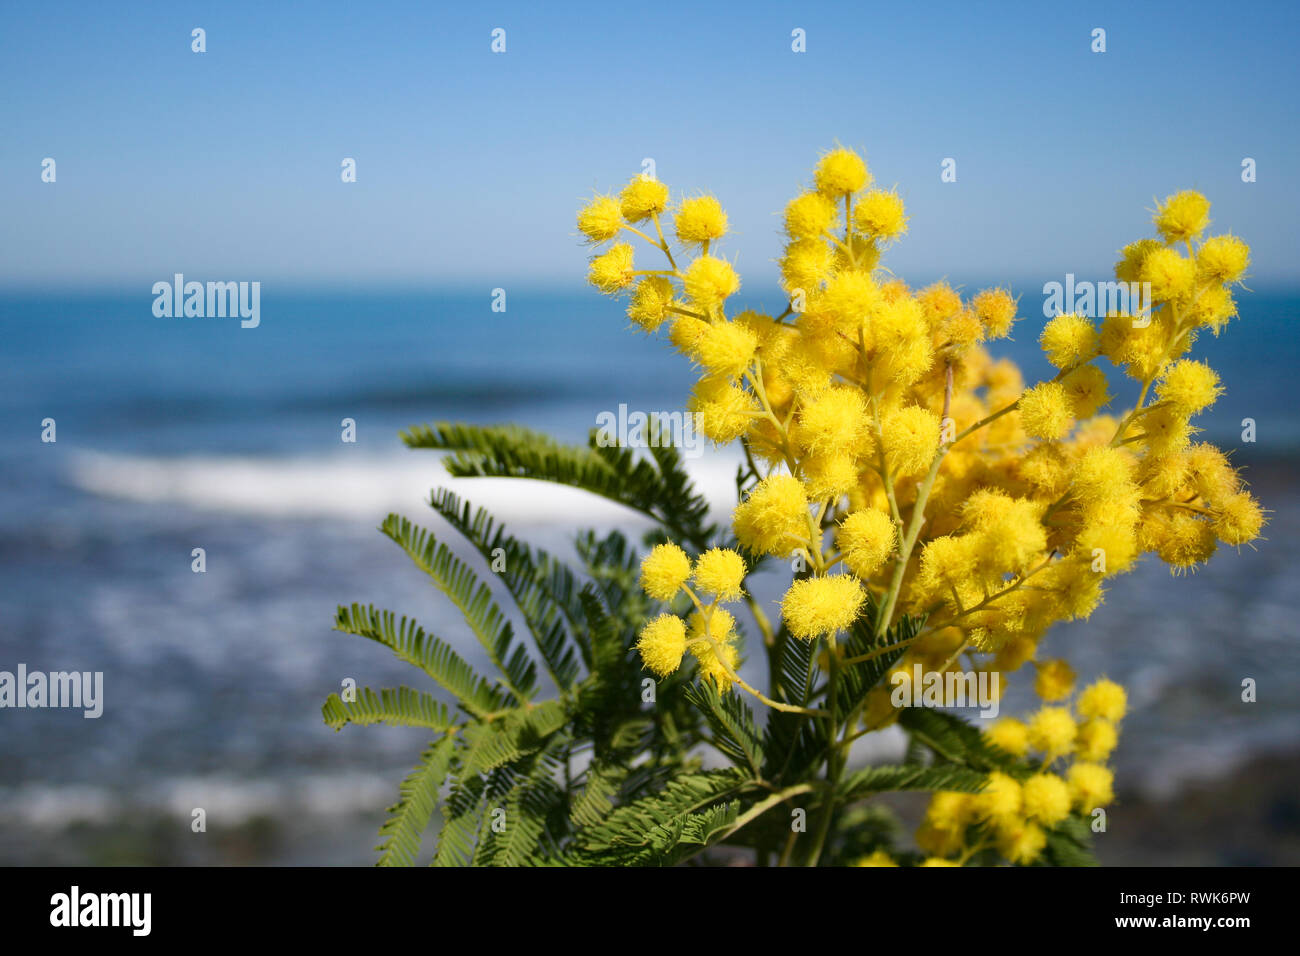 Mimosa branch in bloom, beautiful spring yellow flower with sea on background, International Women's Day Stock Photo